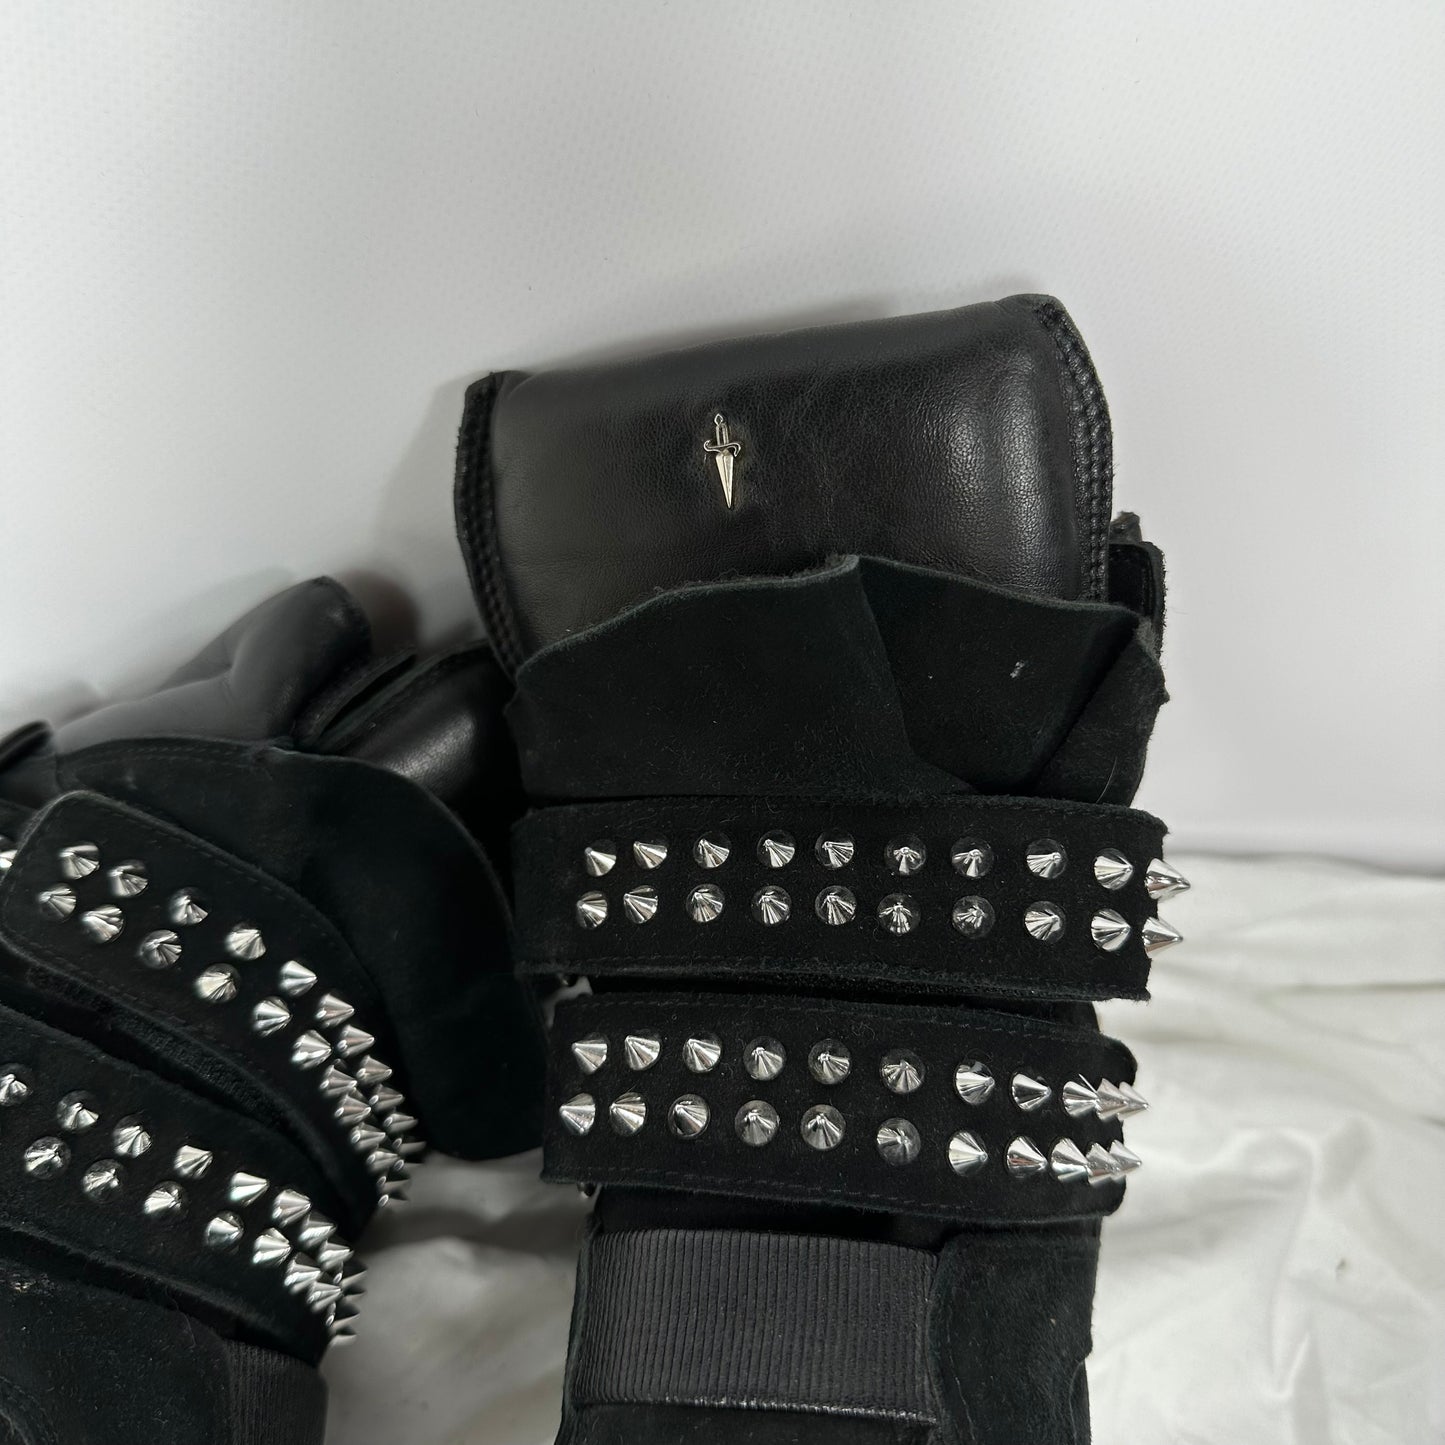 Paciotti Studded Wedge Sneakers 37